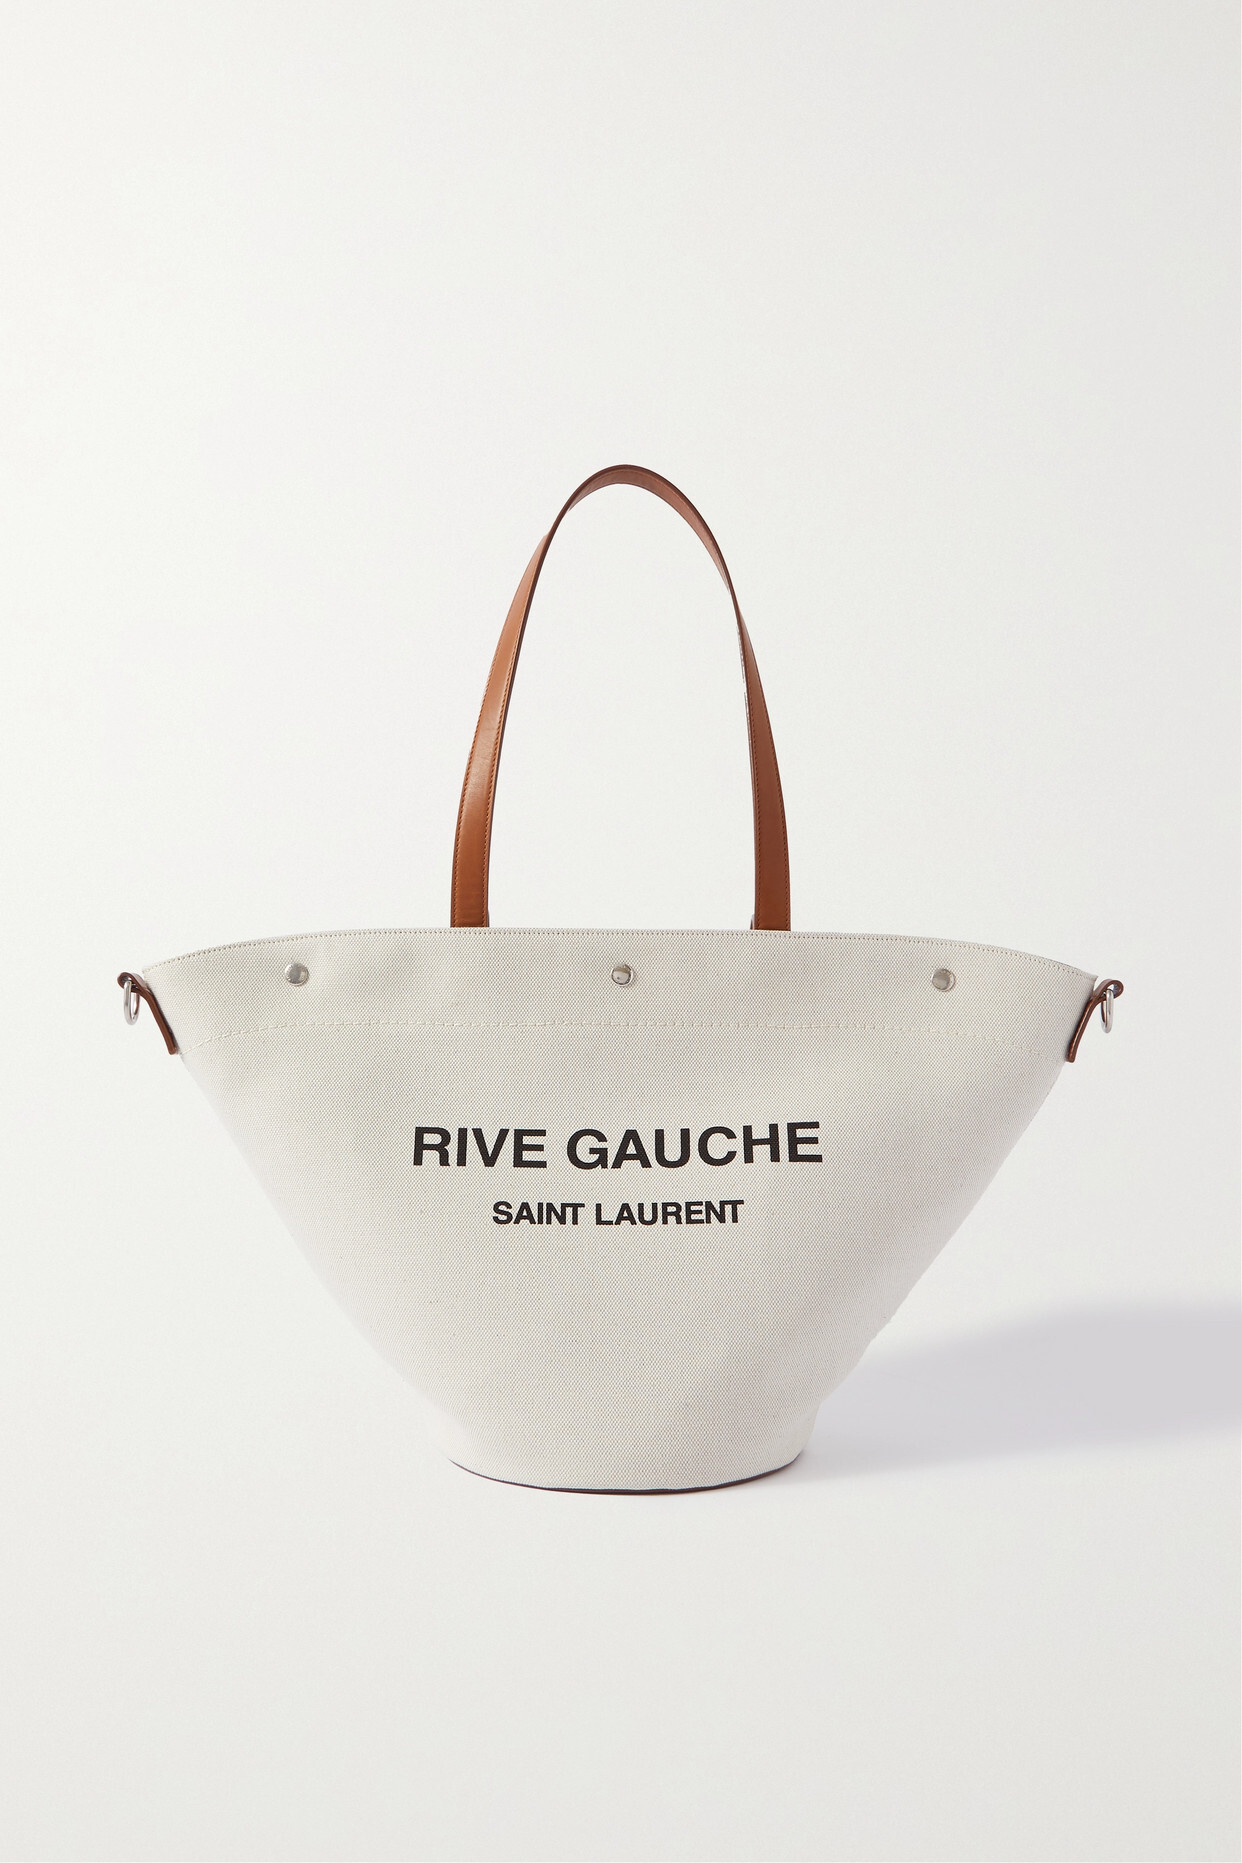 SAINT LAURENT - Rive Gauche Printed Leather-trimmed Canvas Tote - Gray